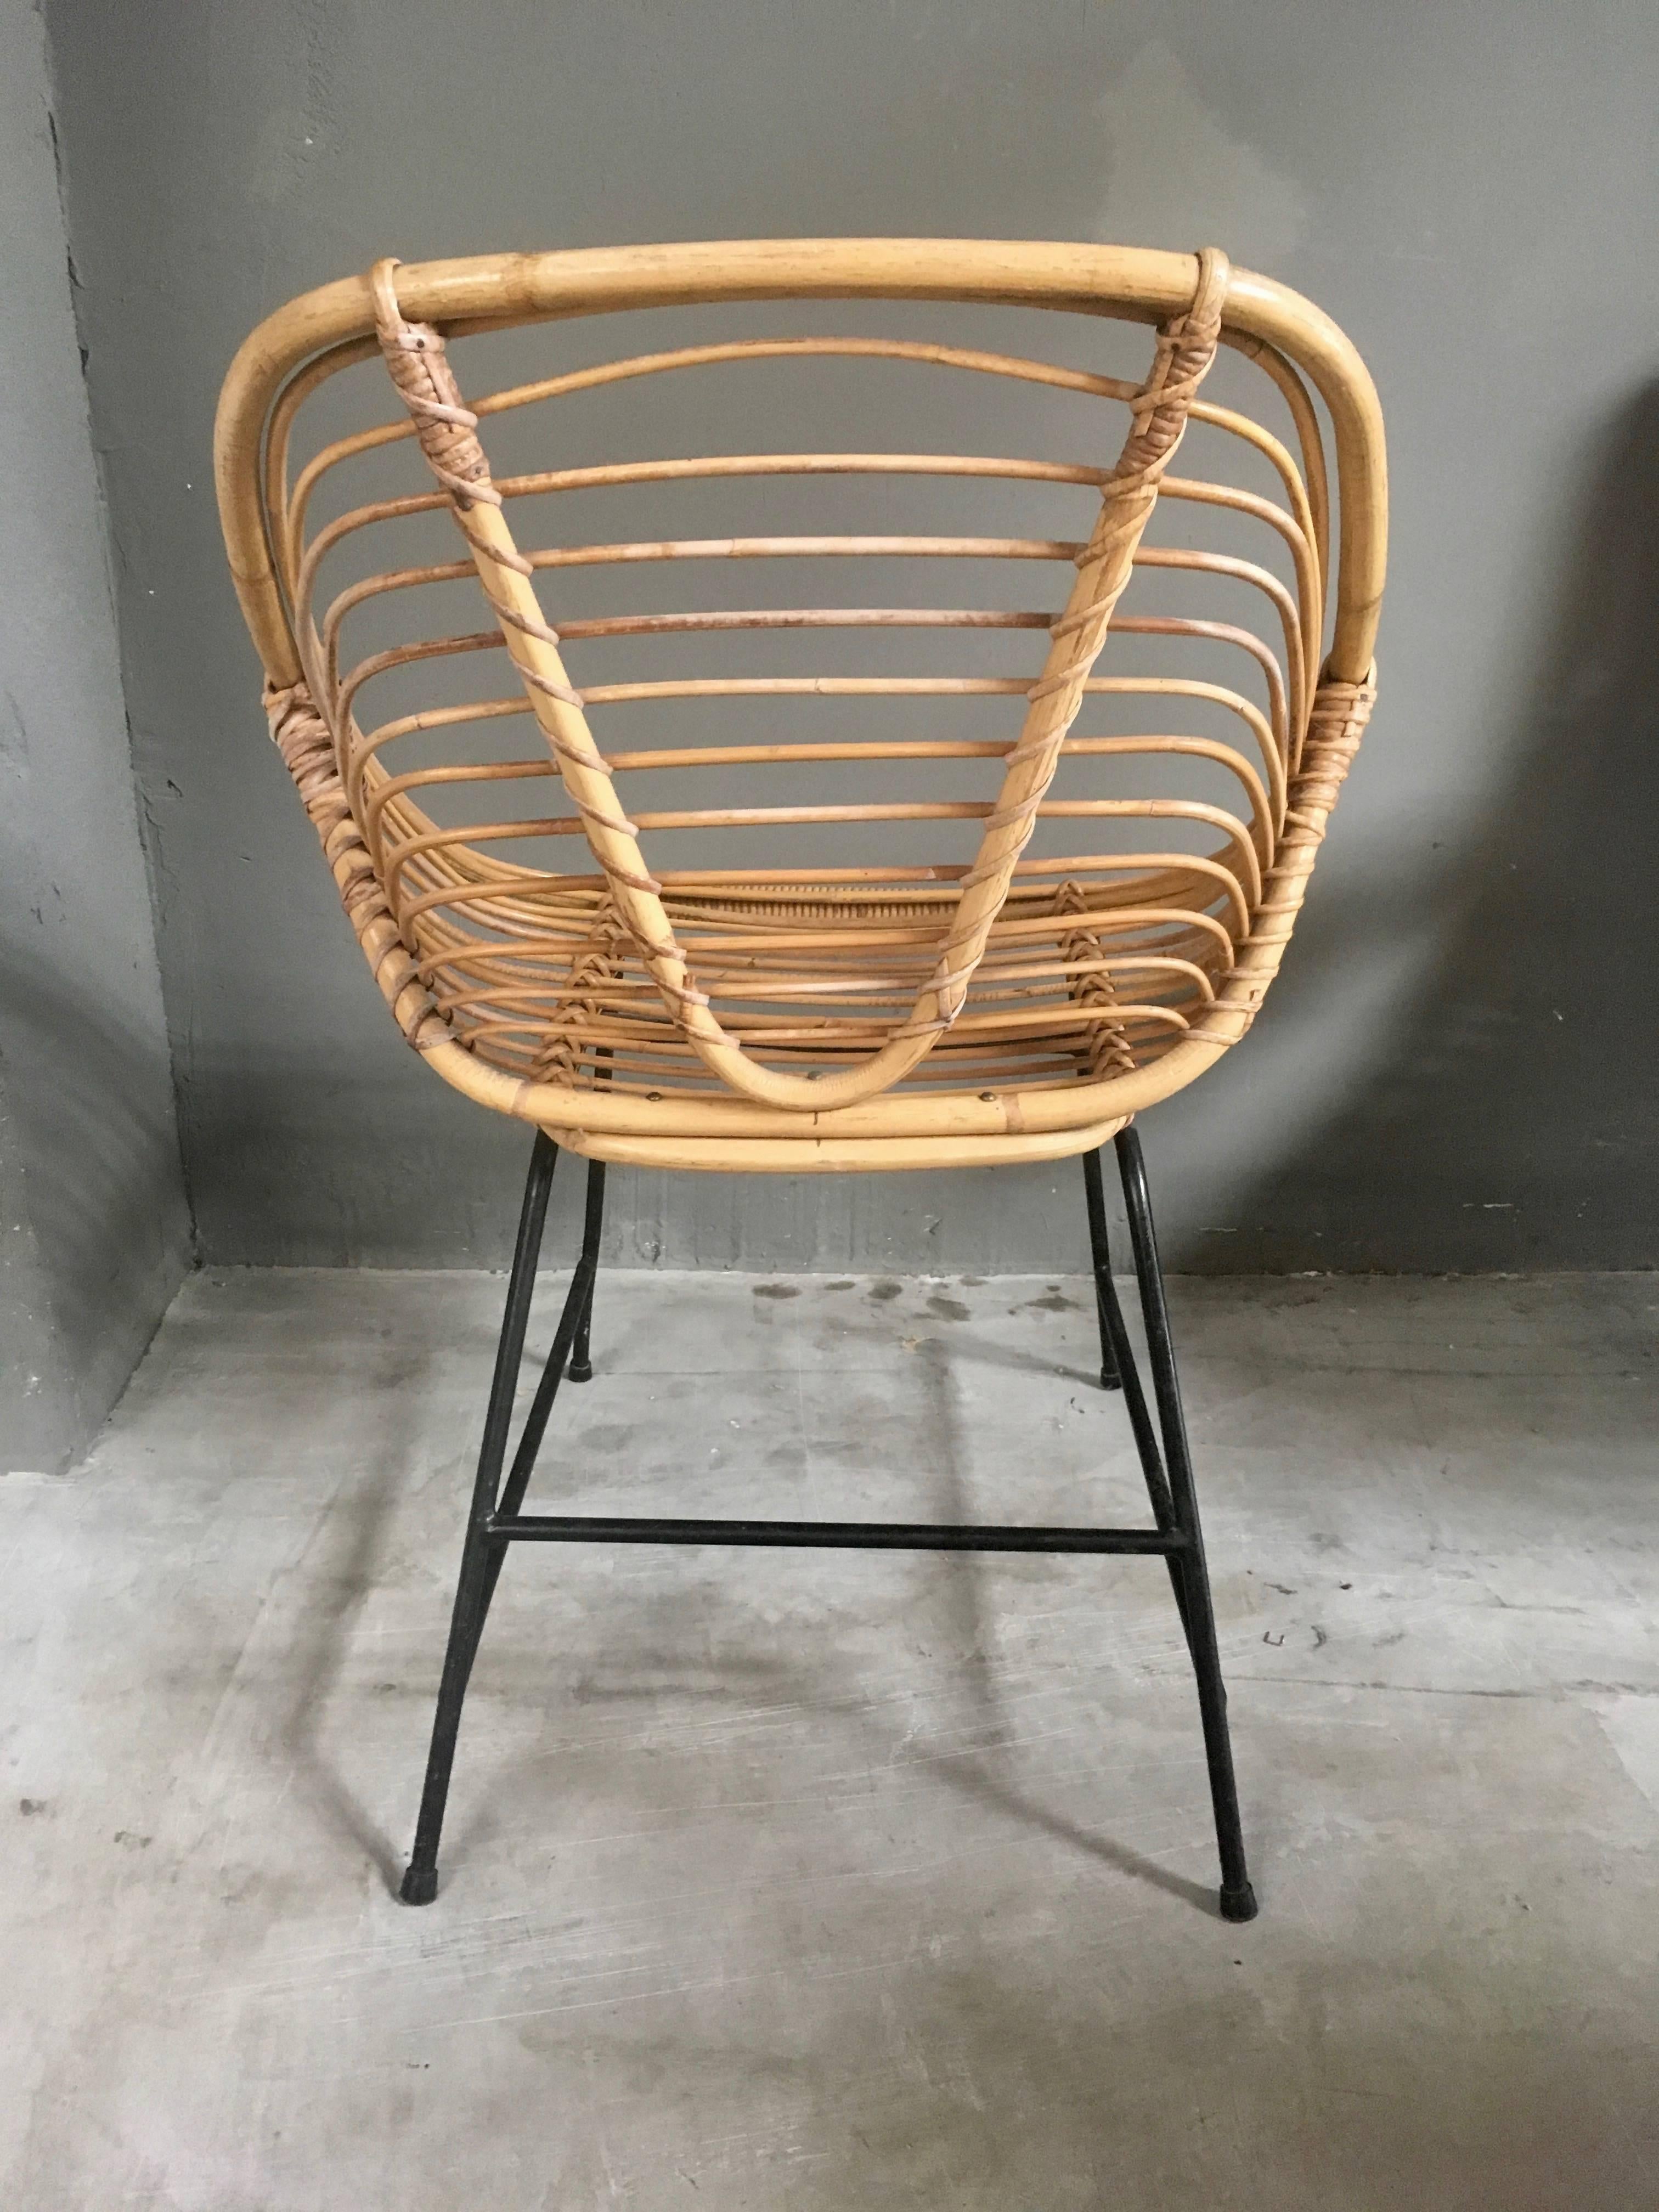 Vintage French Wicker and Rattan Chairs In Excellent Condition For Sale In Los Angeles, CA